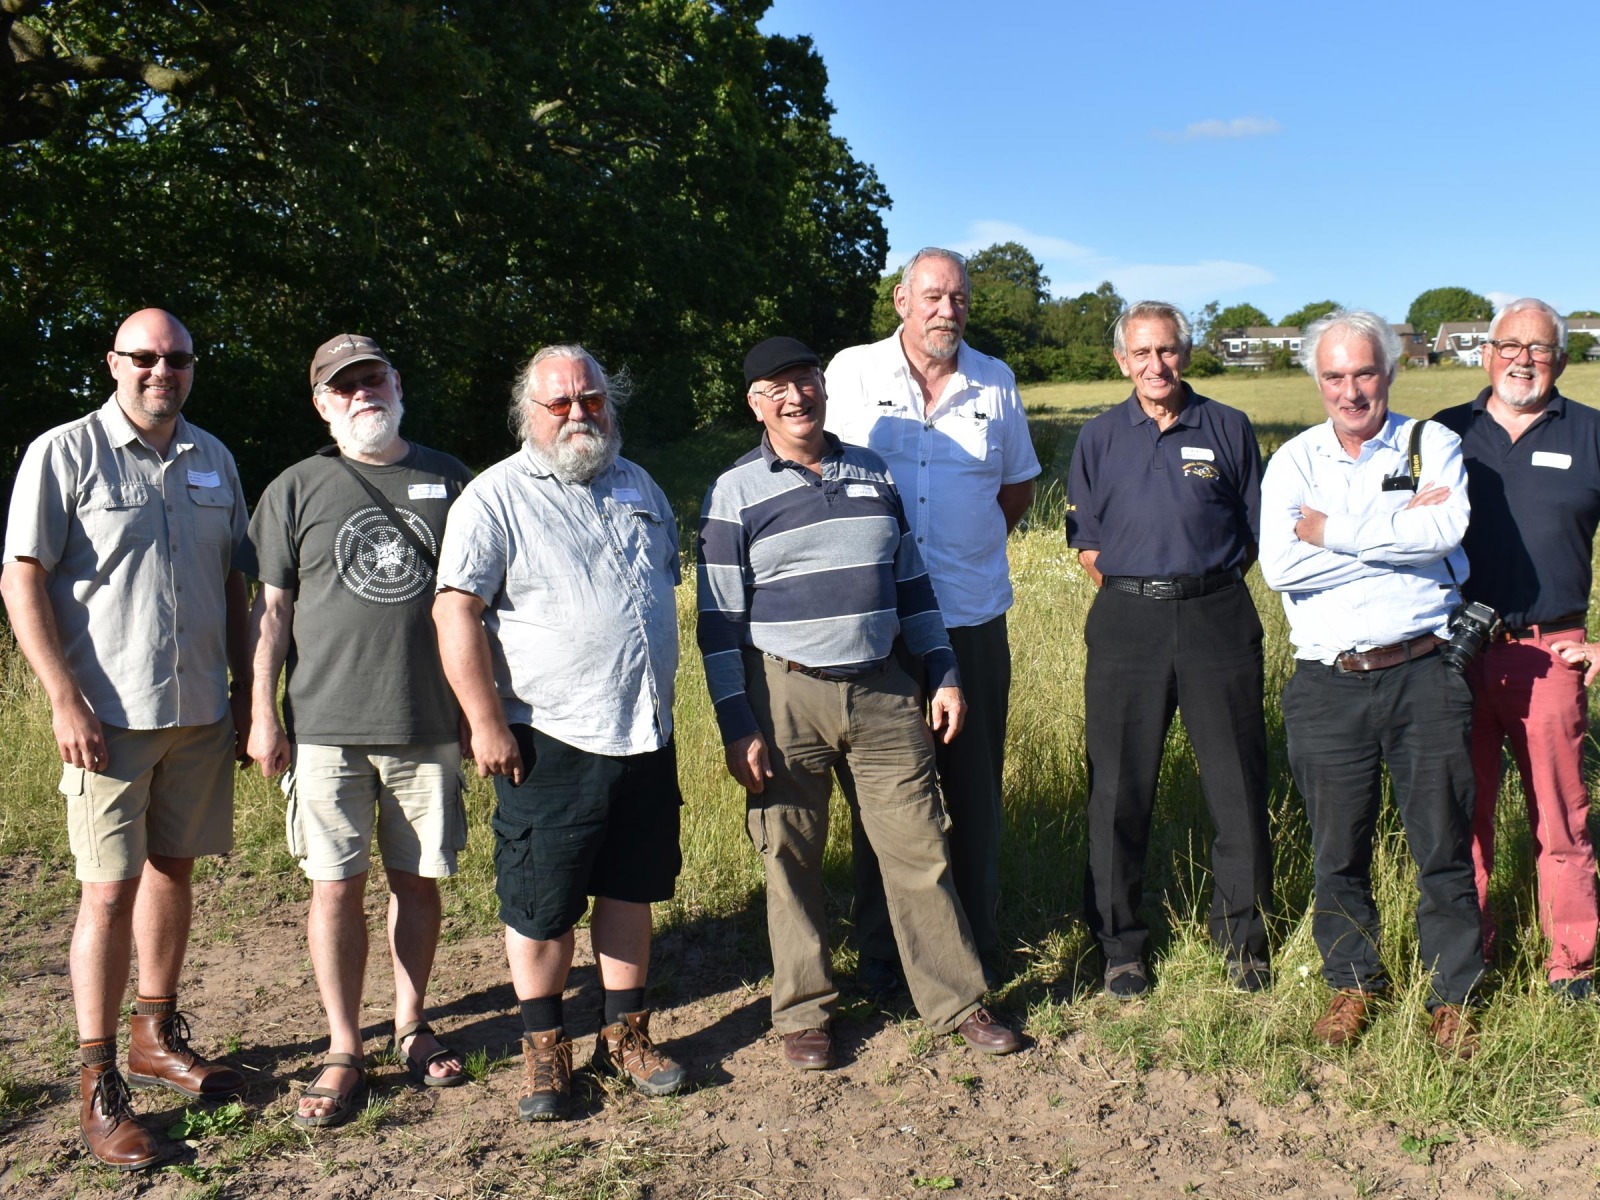 Front row: Michael Livingston, Robert Woosnam Savage, Kelly DeVries, Chas Jones. Battle of Fulford 1066, project. Robert Philpott. Archaeologist. Others in group are WA members.